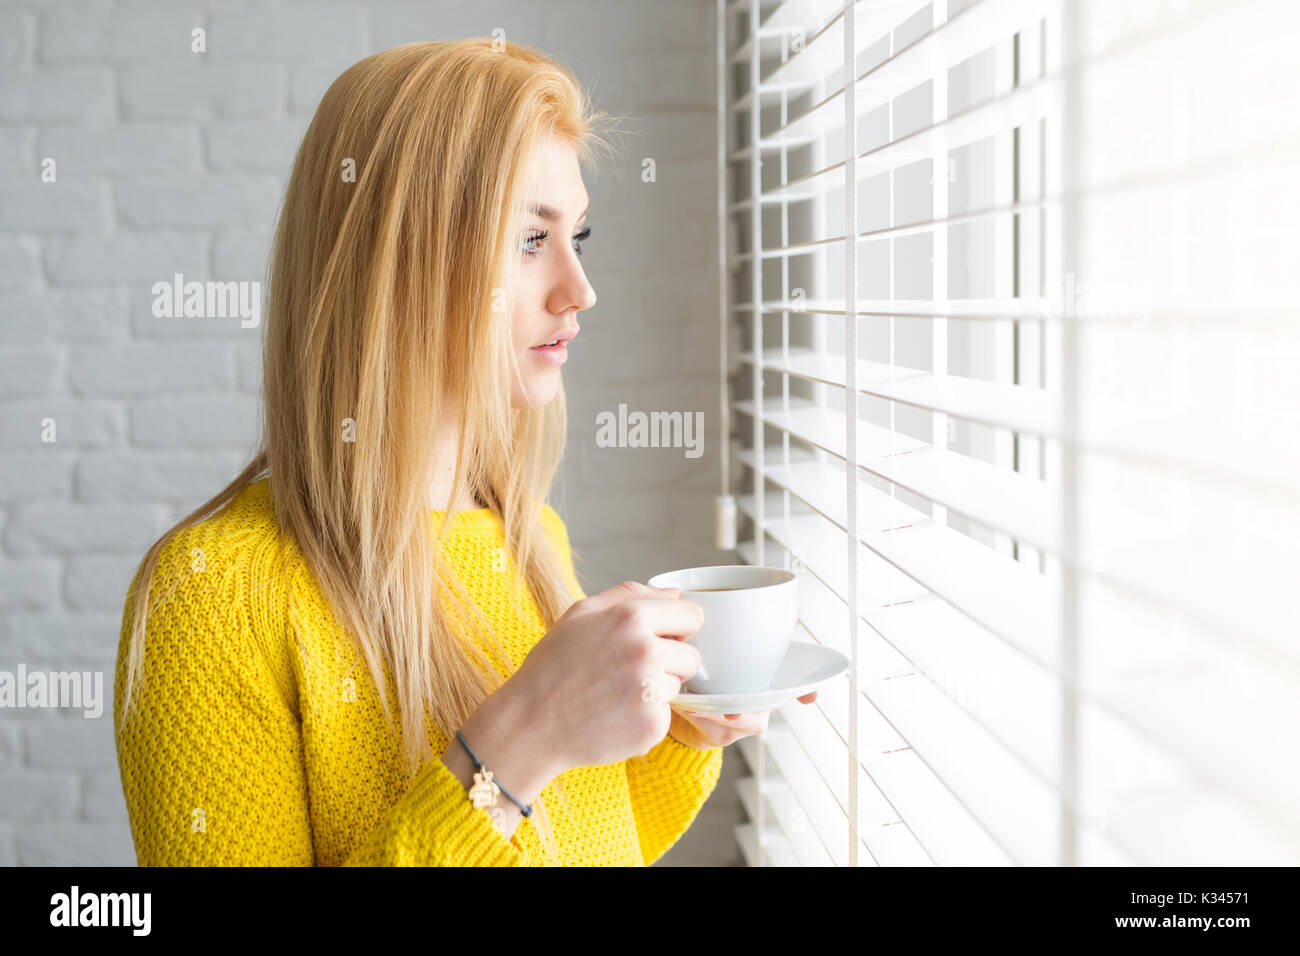 A photo of young woman looking outside the window. She's holding a cup of tea. Stock Photo